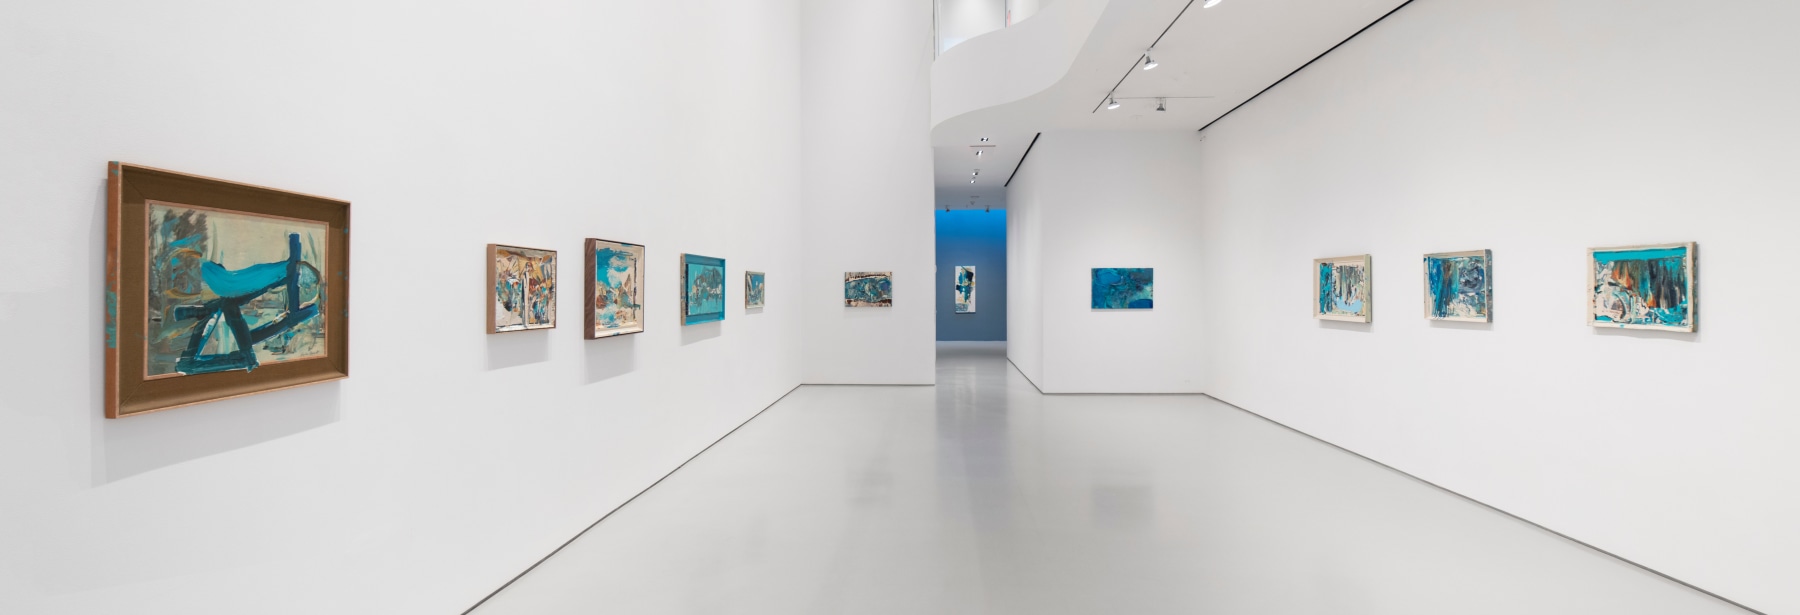 A long view of the gallery featuring a grouping of abstract paintings on parallel walls, merging towards one vertical composition at the center.